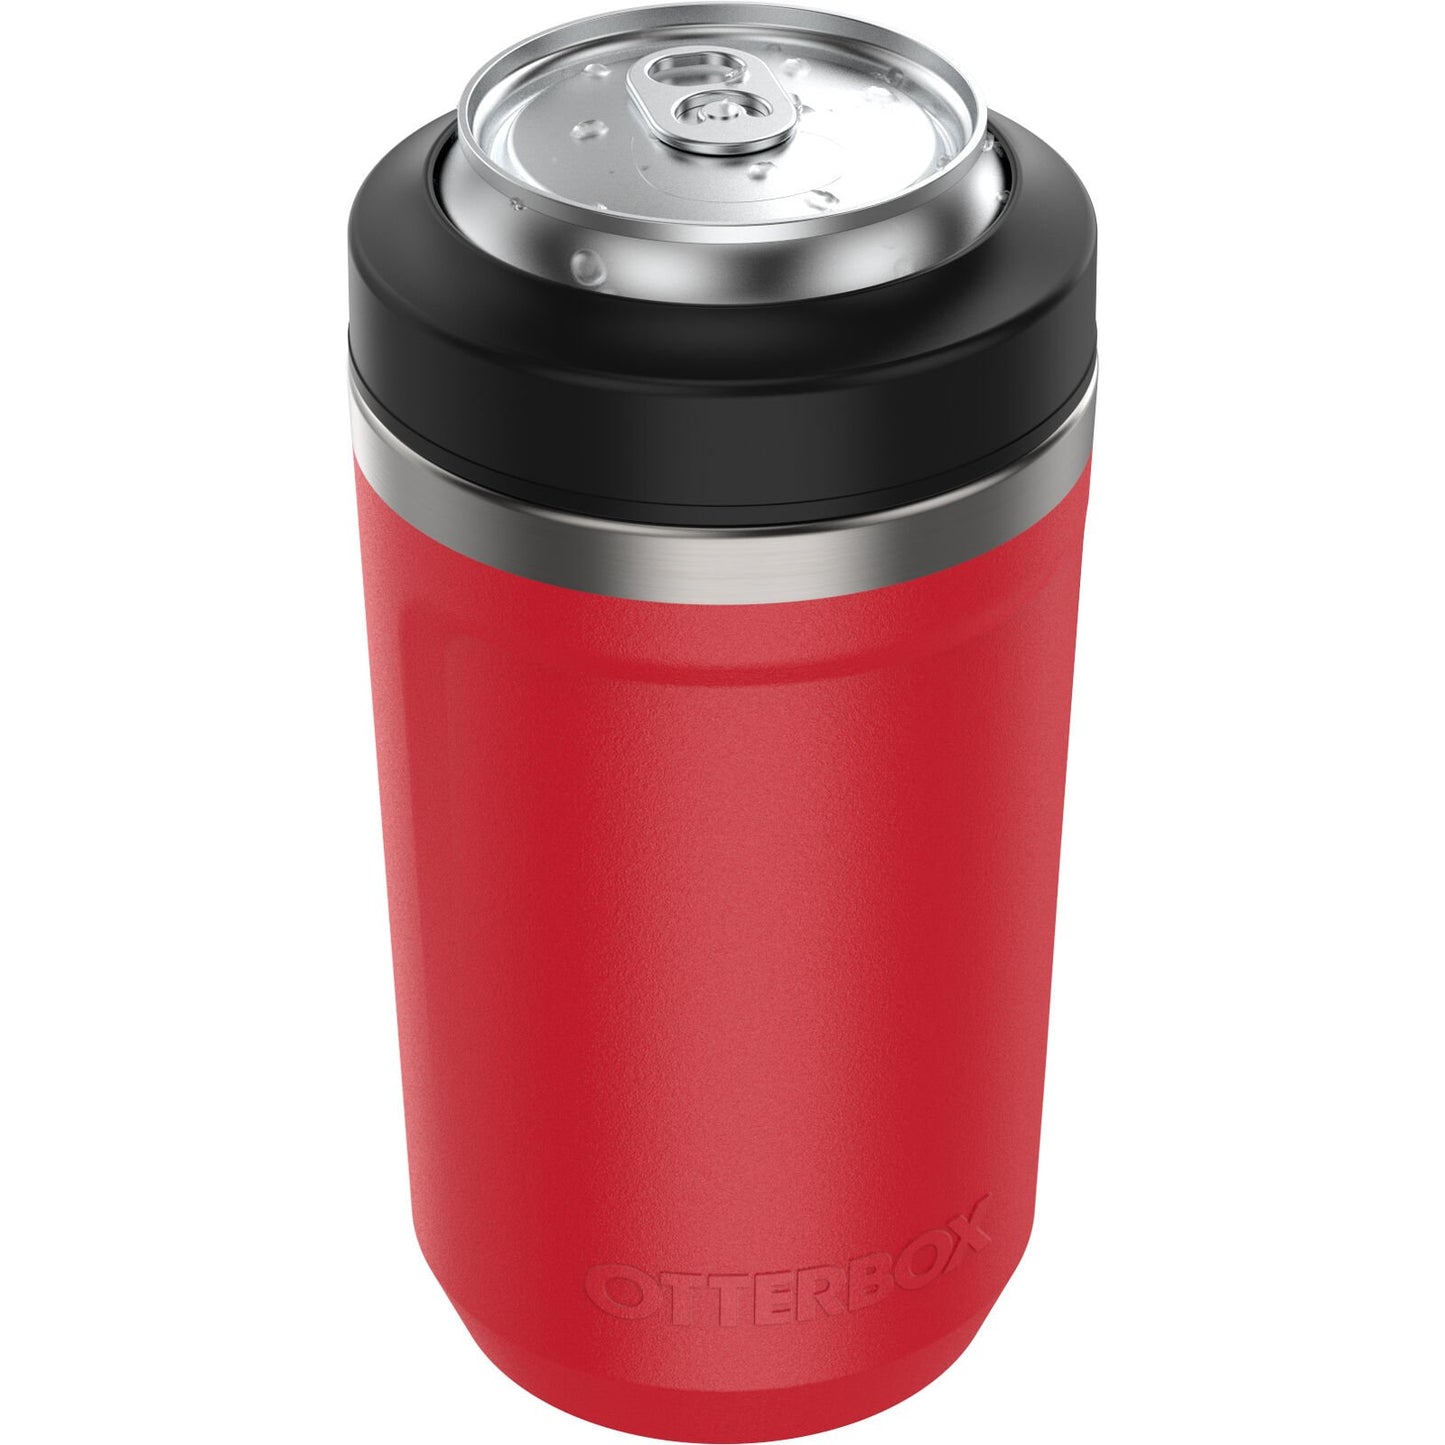 Otterbox Elevation Can Cooler - Red